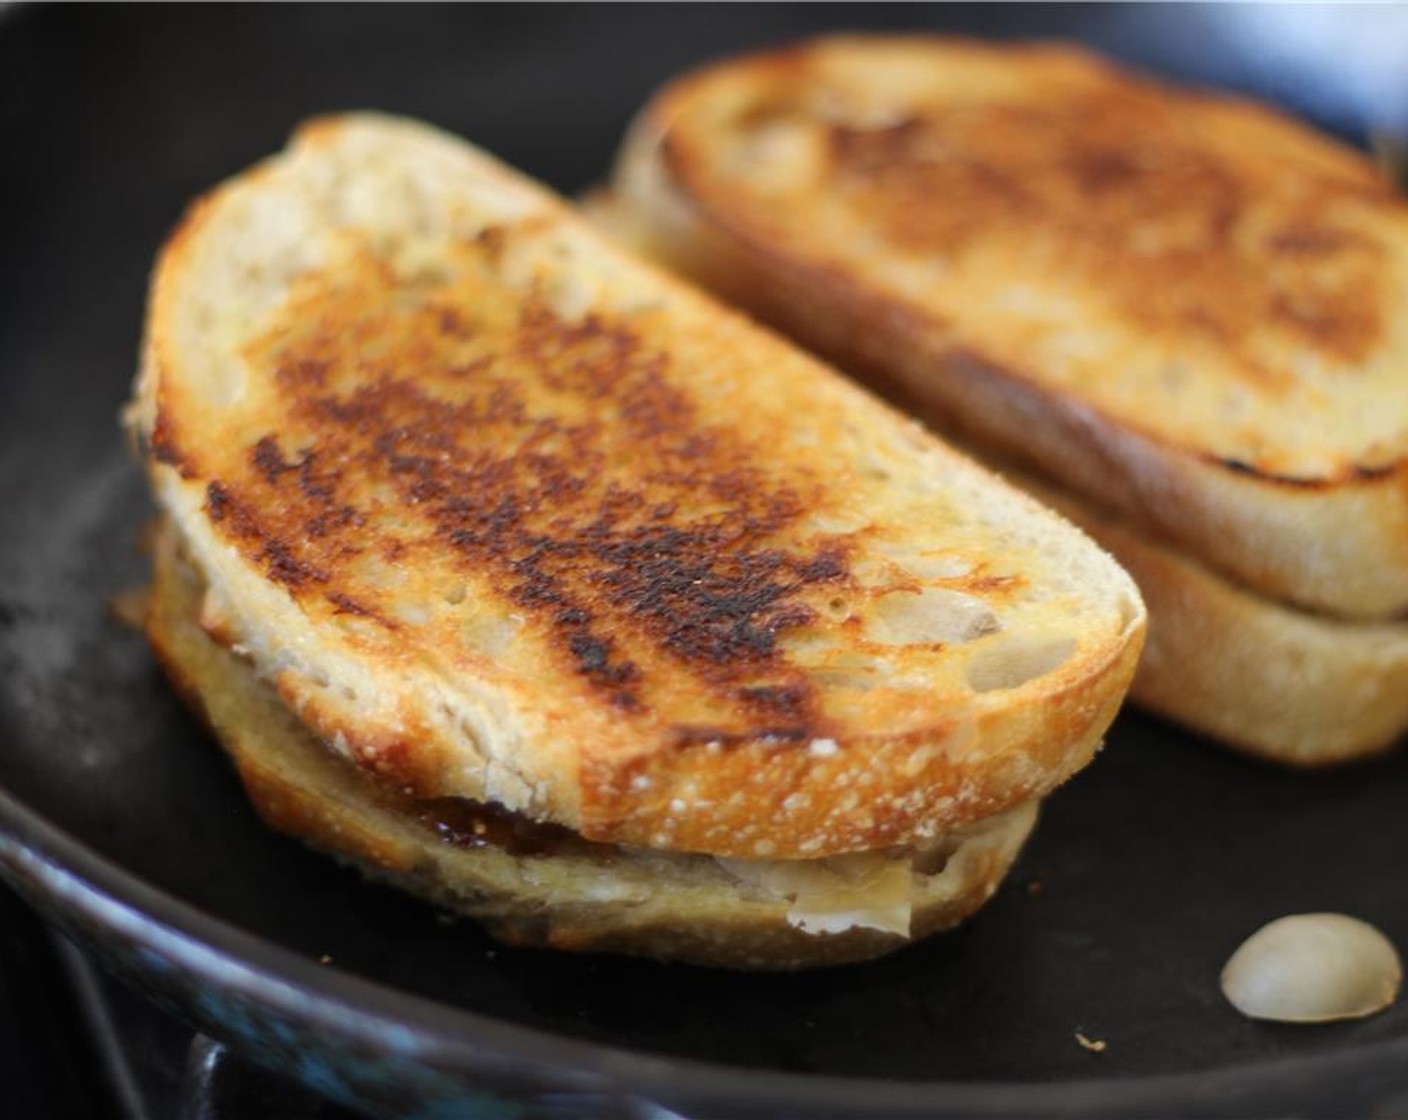 step 5 Place the sandwich on the skillet and press down with a spatula. Grill for about 5 minutes, or until the bread is turning golden brown and the cheese is melting. Flip the sandwich and continue cooking until the cheese is melted.